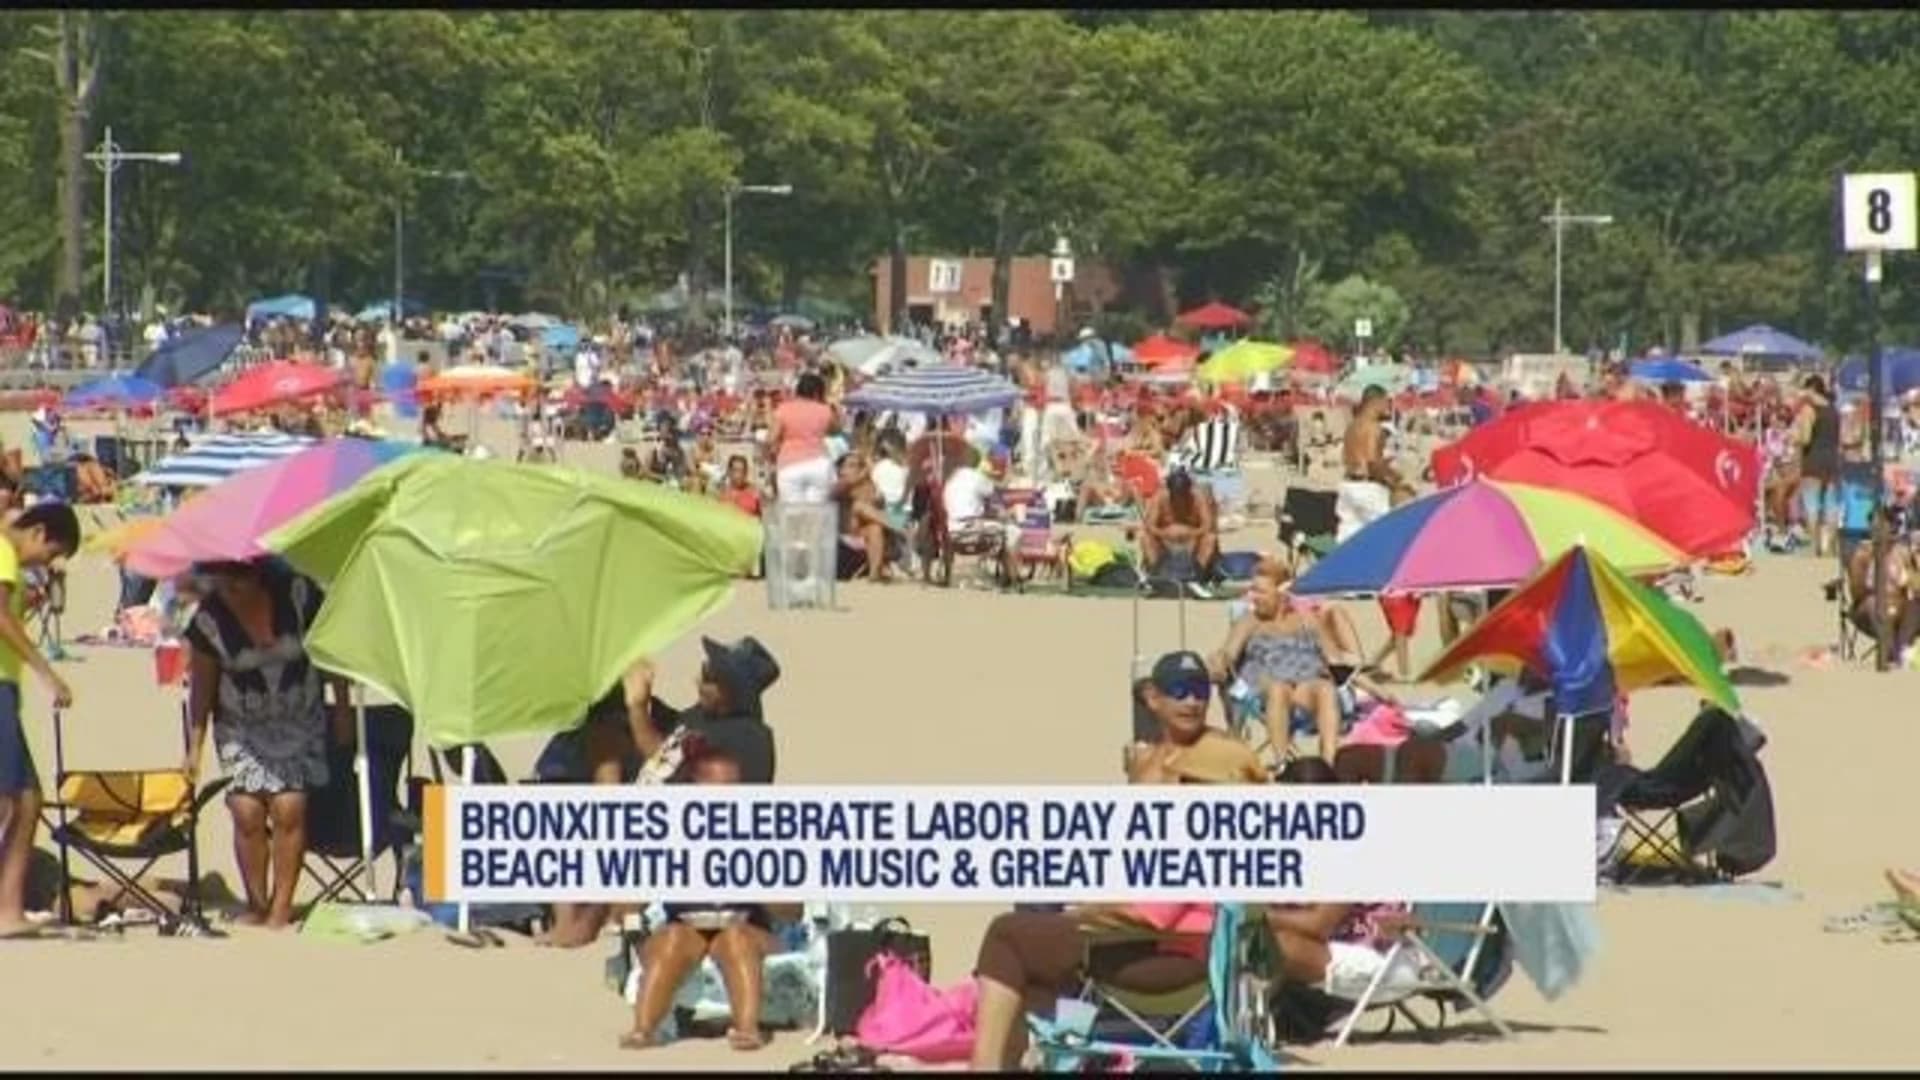 Beautiful weather provides perfect send-off to summer at Orchard Beach